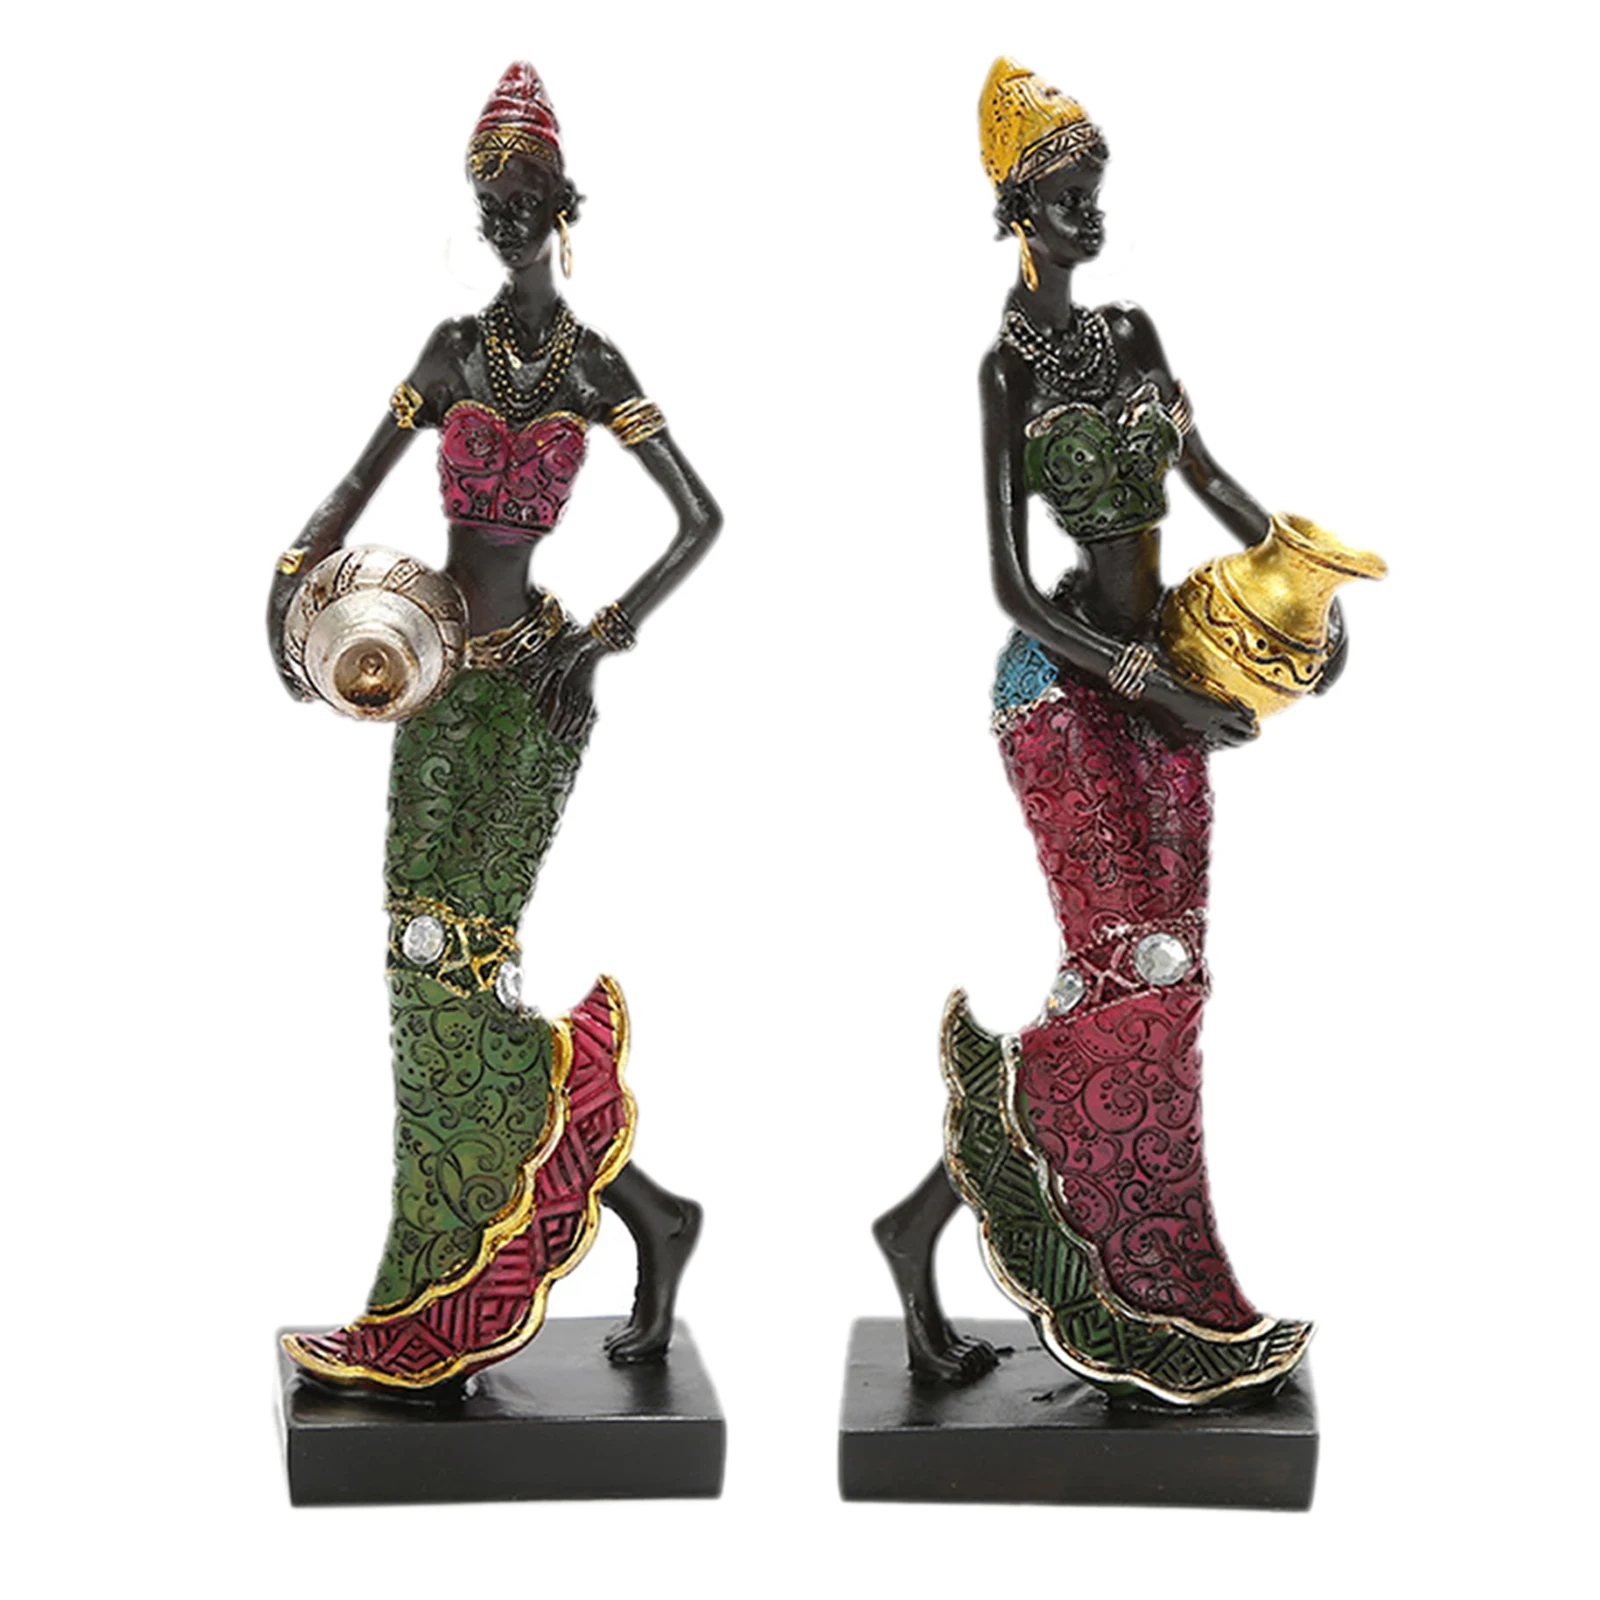 African Figurine Women Figure Tribal Lady Statue Sculpture Collectible Art Piece African Decoration For Home Office TV Cabinet